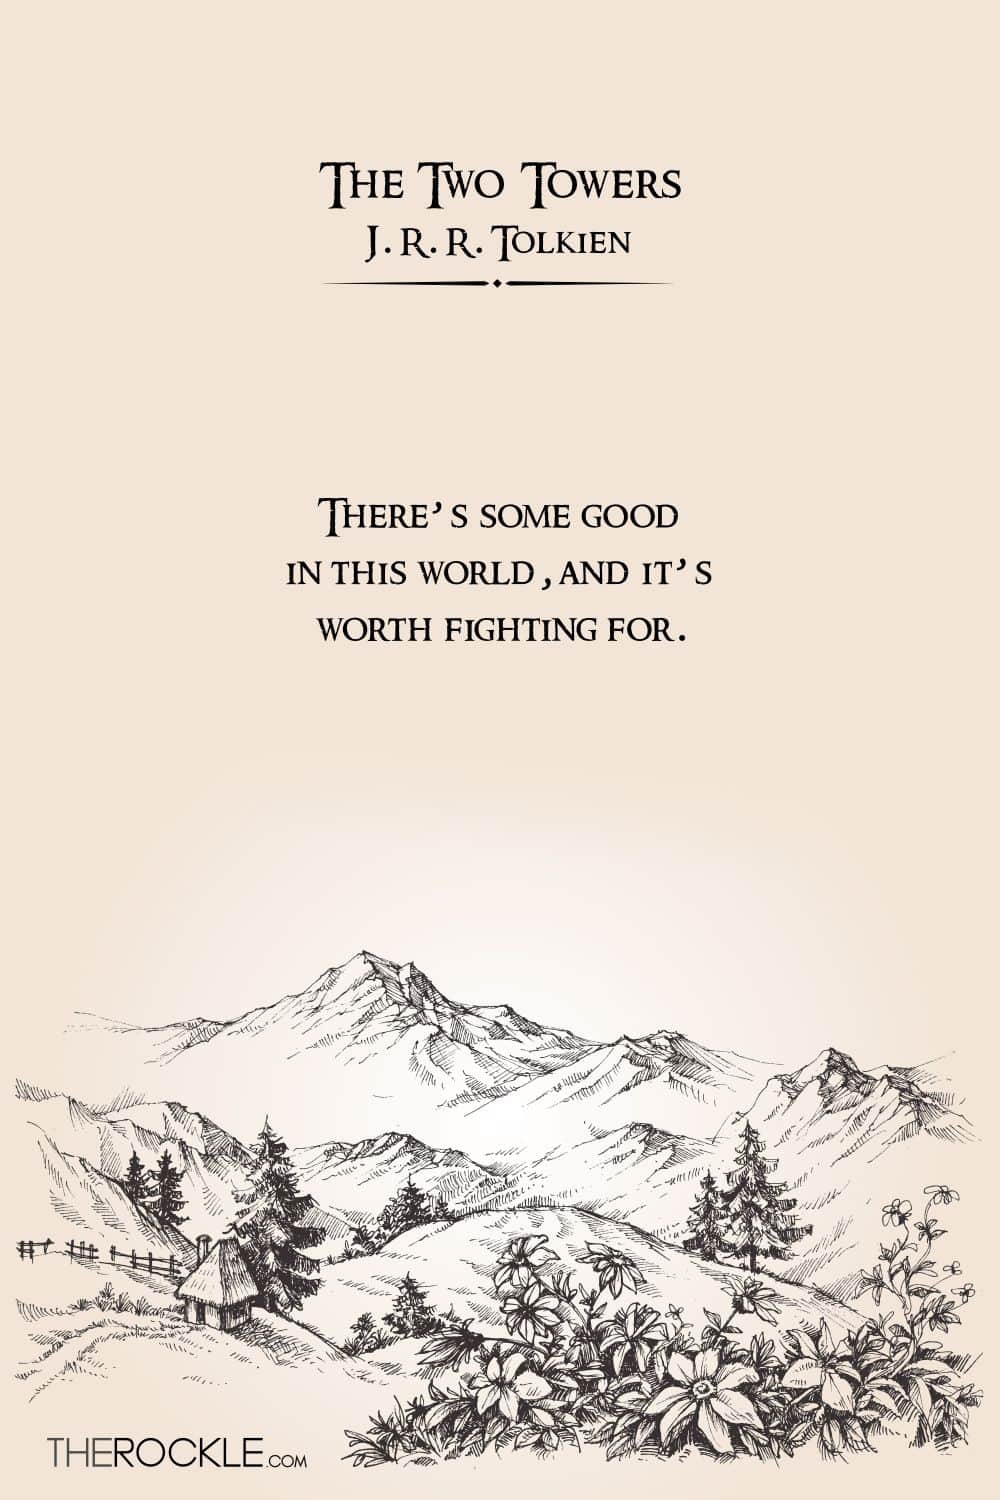 Tolkien on fighting for good in the world